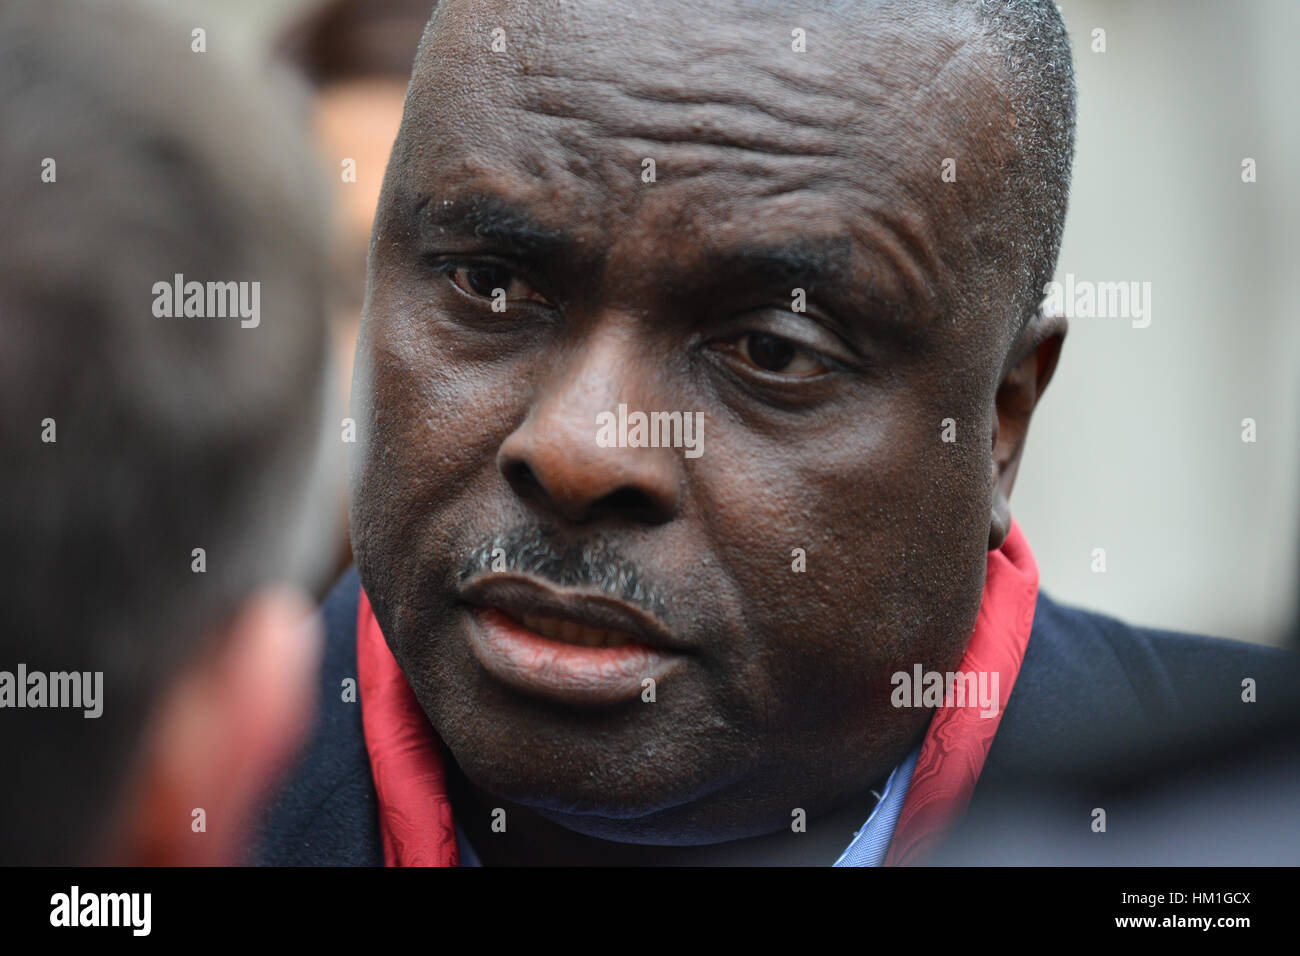 Royal Courts Justice, London, UK. 31st January 2017. Fraudster and former Nigerian state governor James Ibori outside the Royal Courts of Justice in London. Credit: Matthew Chattle/Alamy Live News Stock Photo